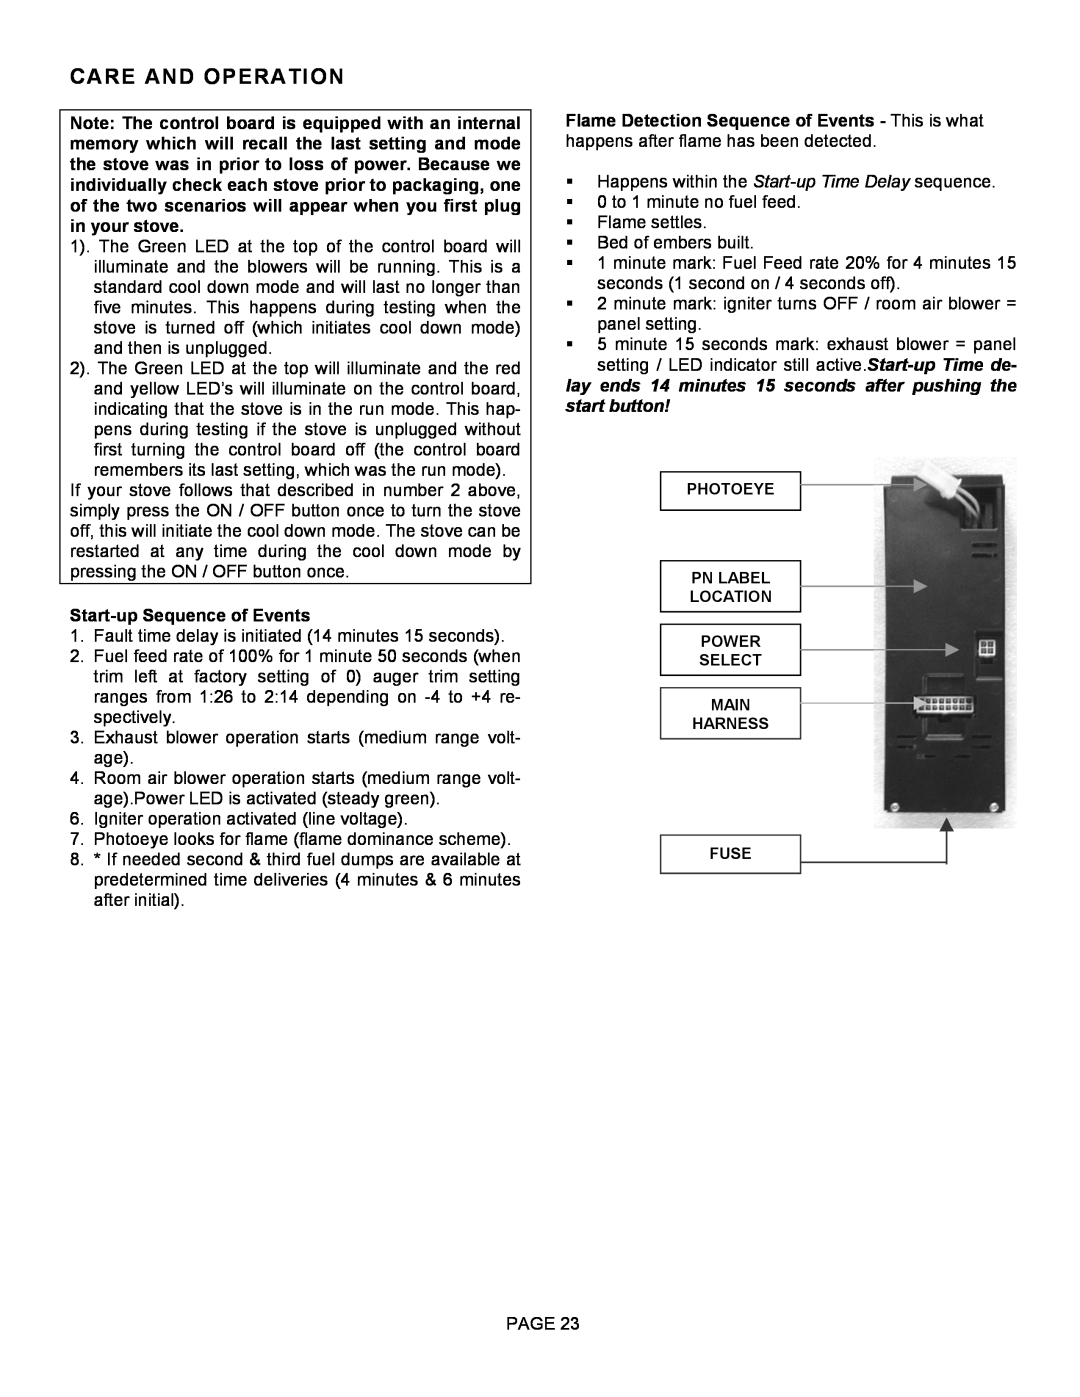 Lenoxx Electronics Optima 3 FS operation manual Start-upSequence of Events, start button, Care And Operation 